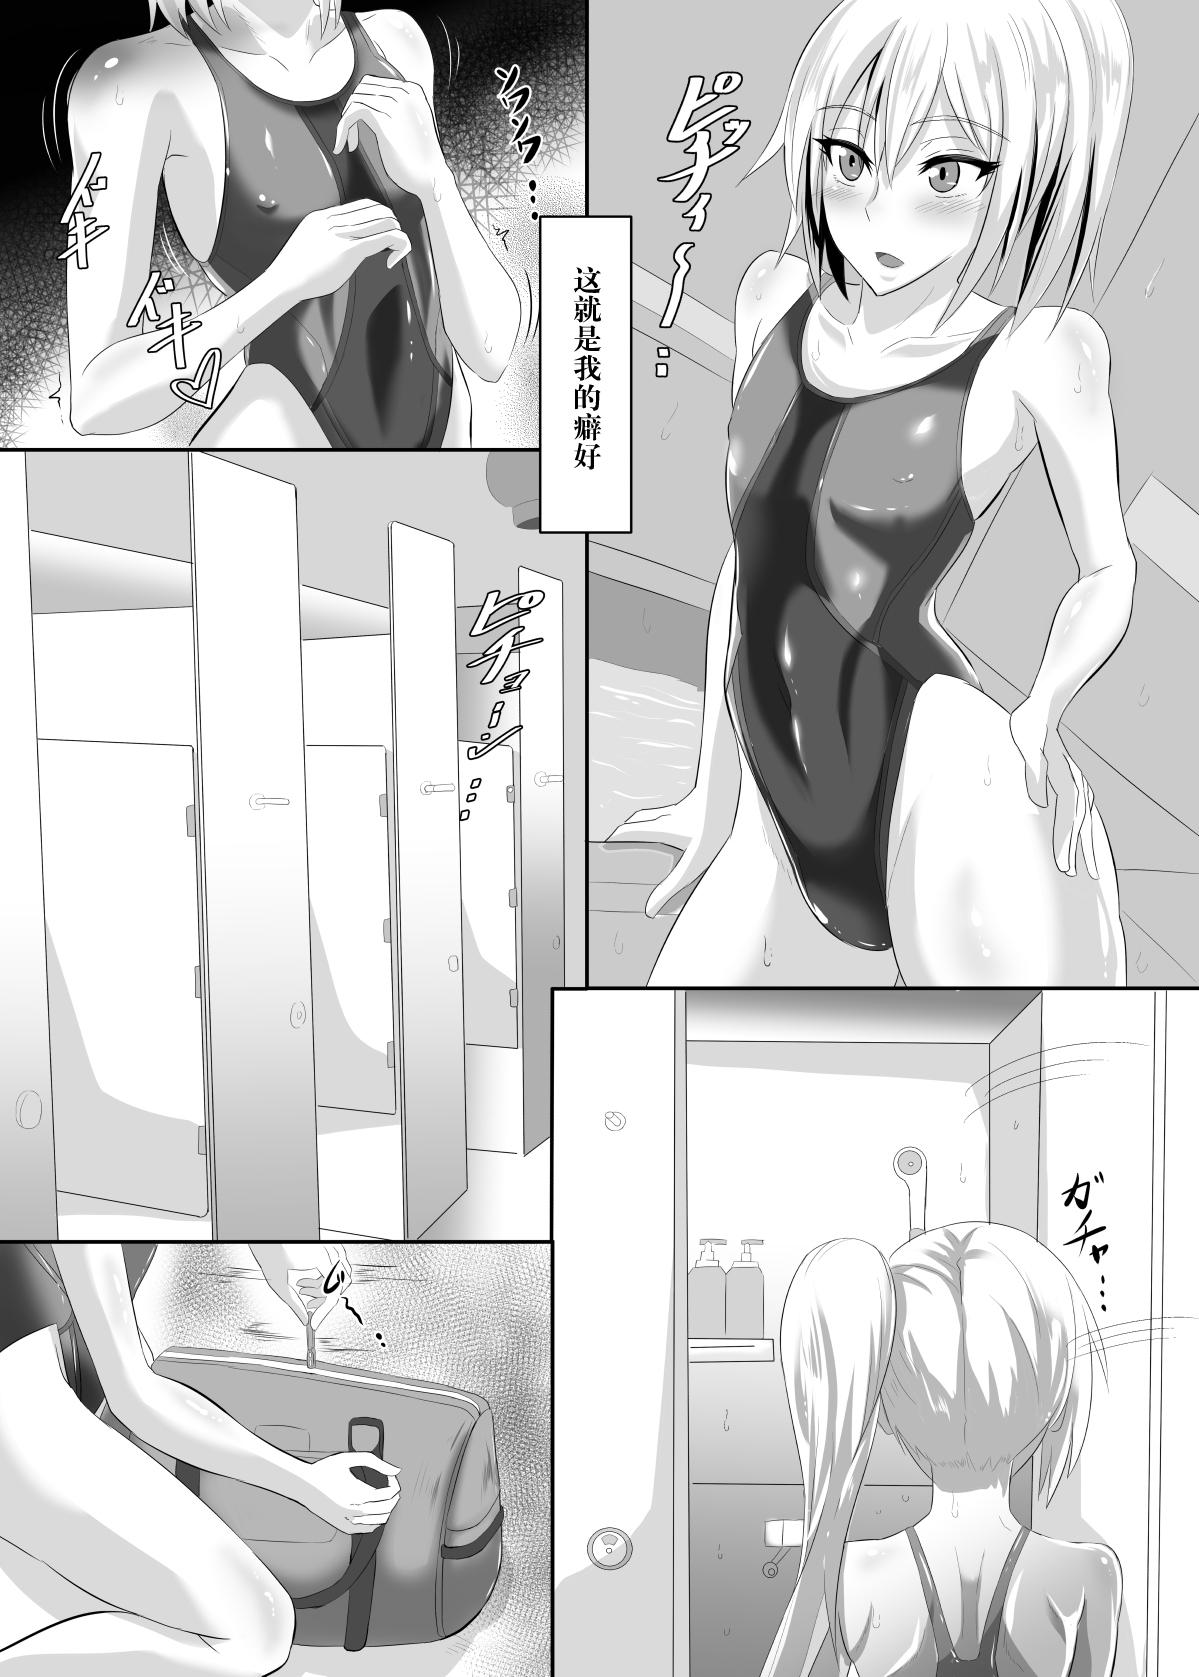 Cameltoe Gehenna 6 - Fate grand order Moaning - Page 11